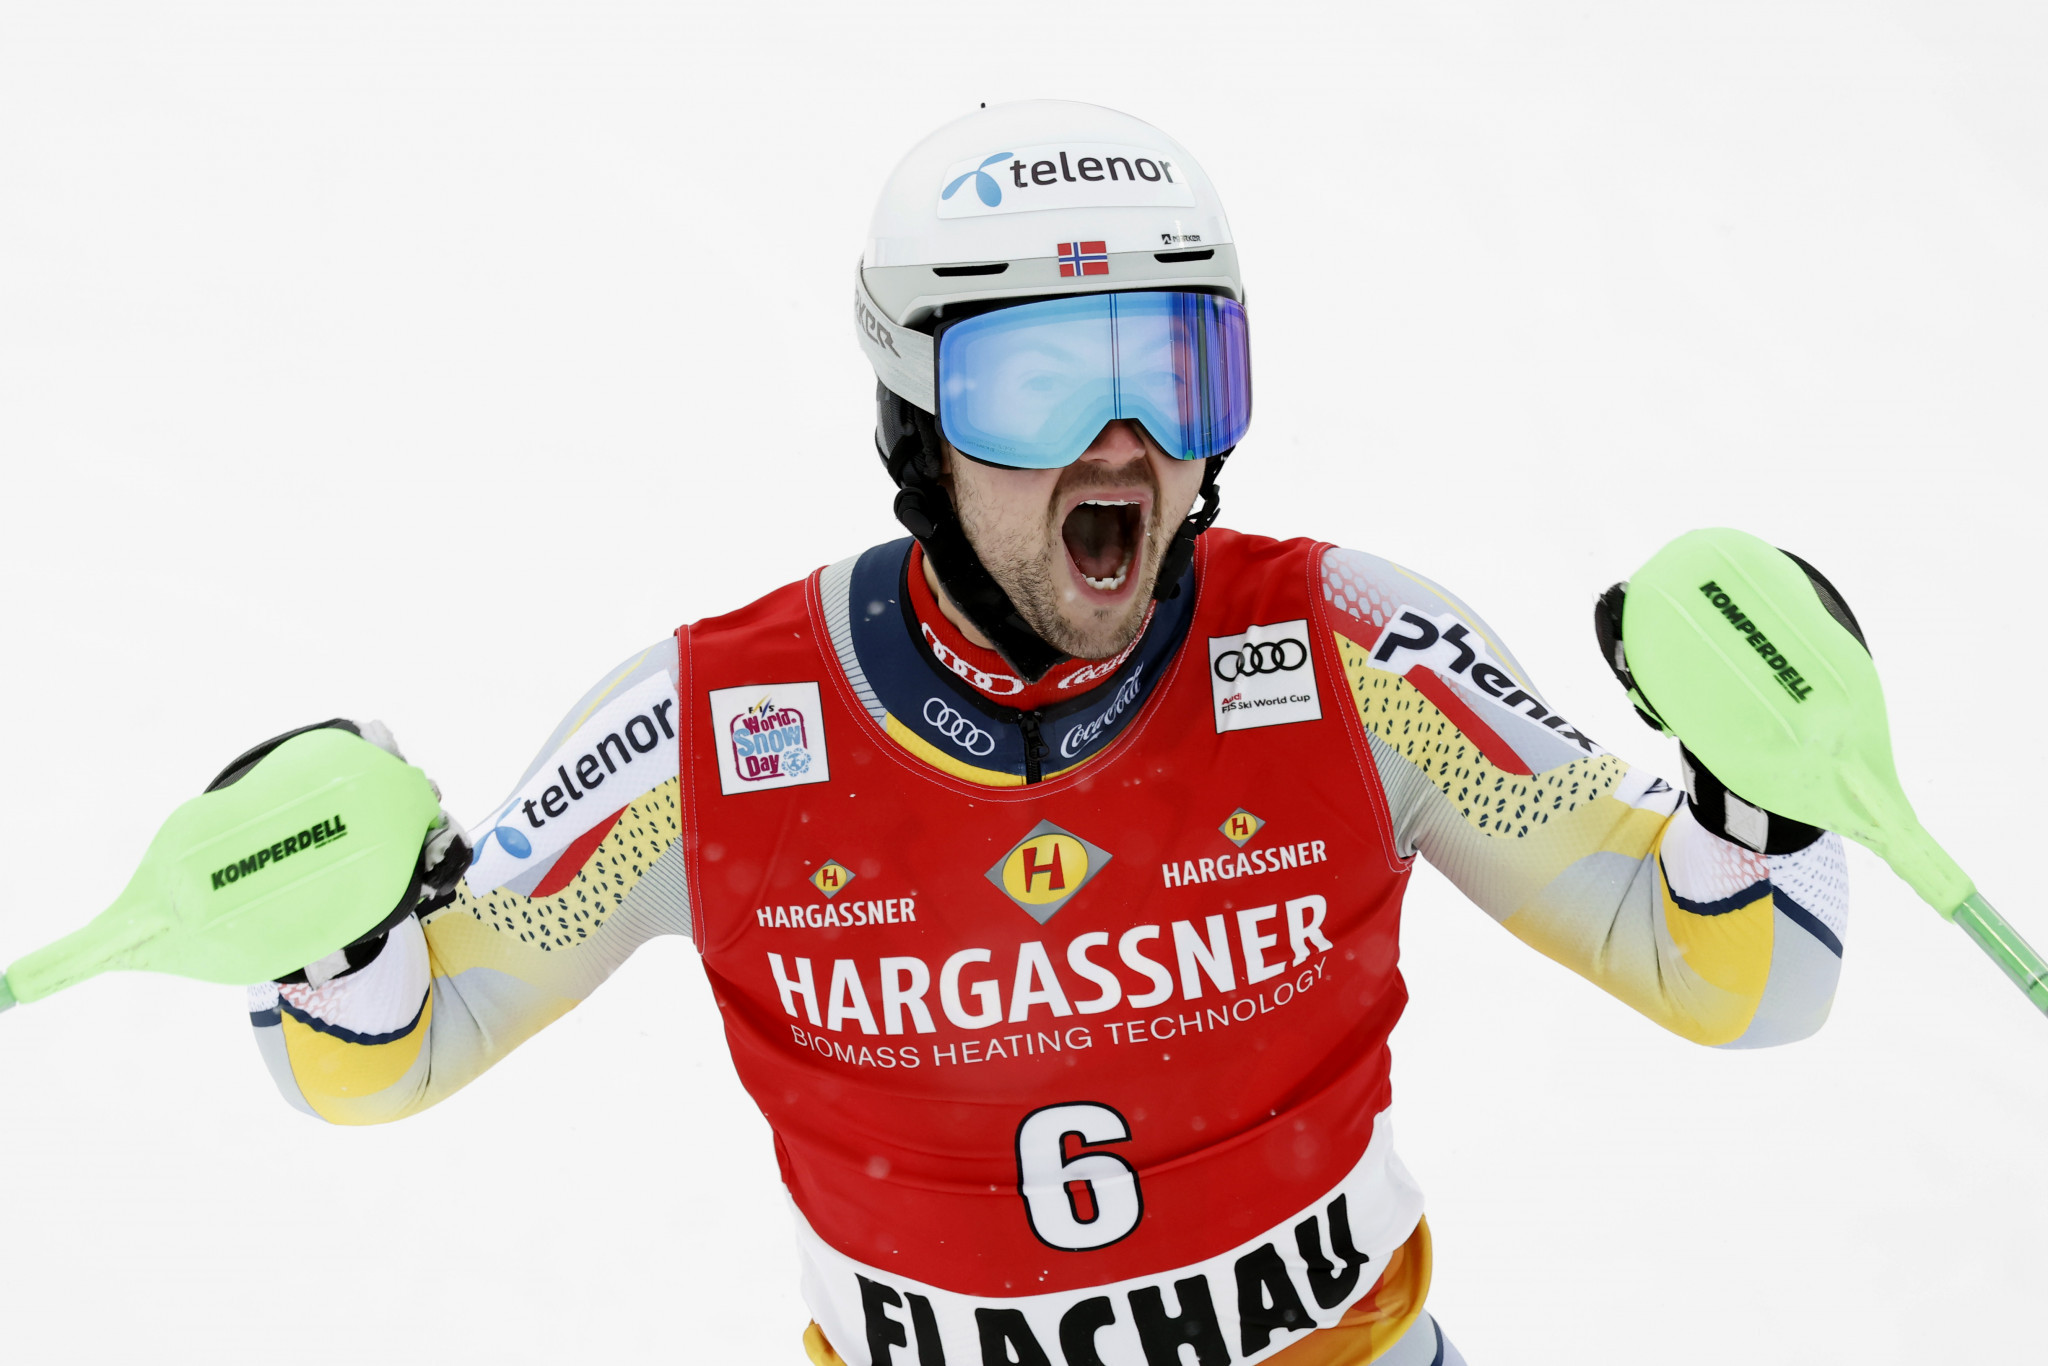 Sebastian Foss-Solevåg secured his first Alpine Ski World Cup victory in Flachau ©Getty Images